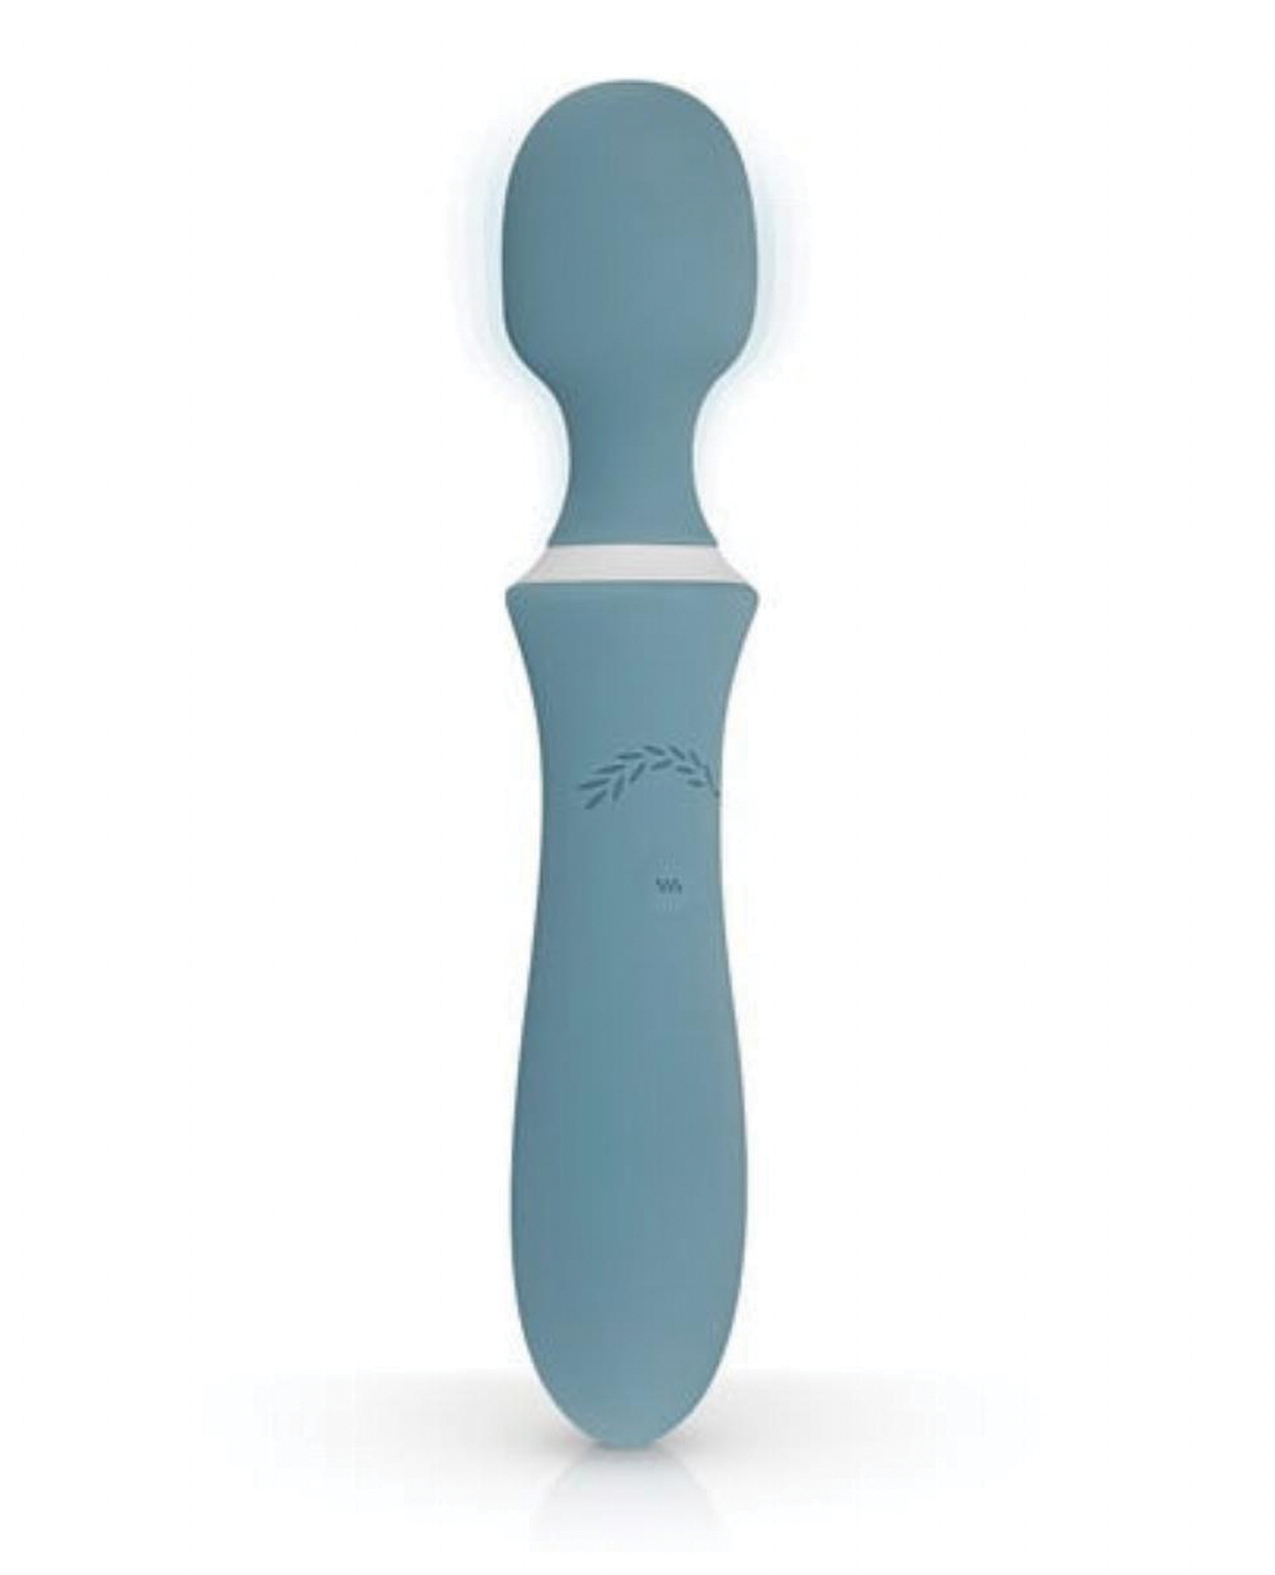 Bloom The Orchid Wand Vibrating massager in Teal